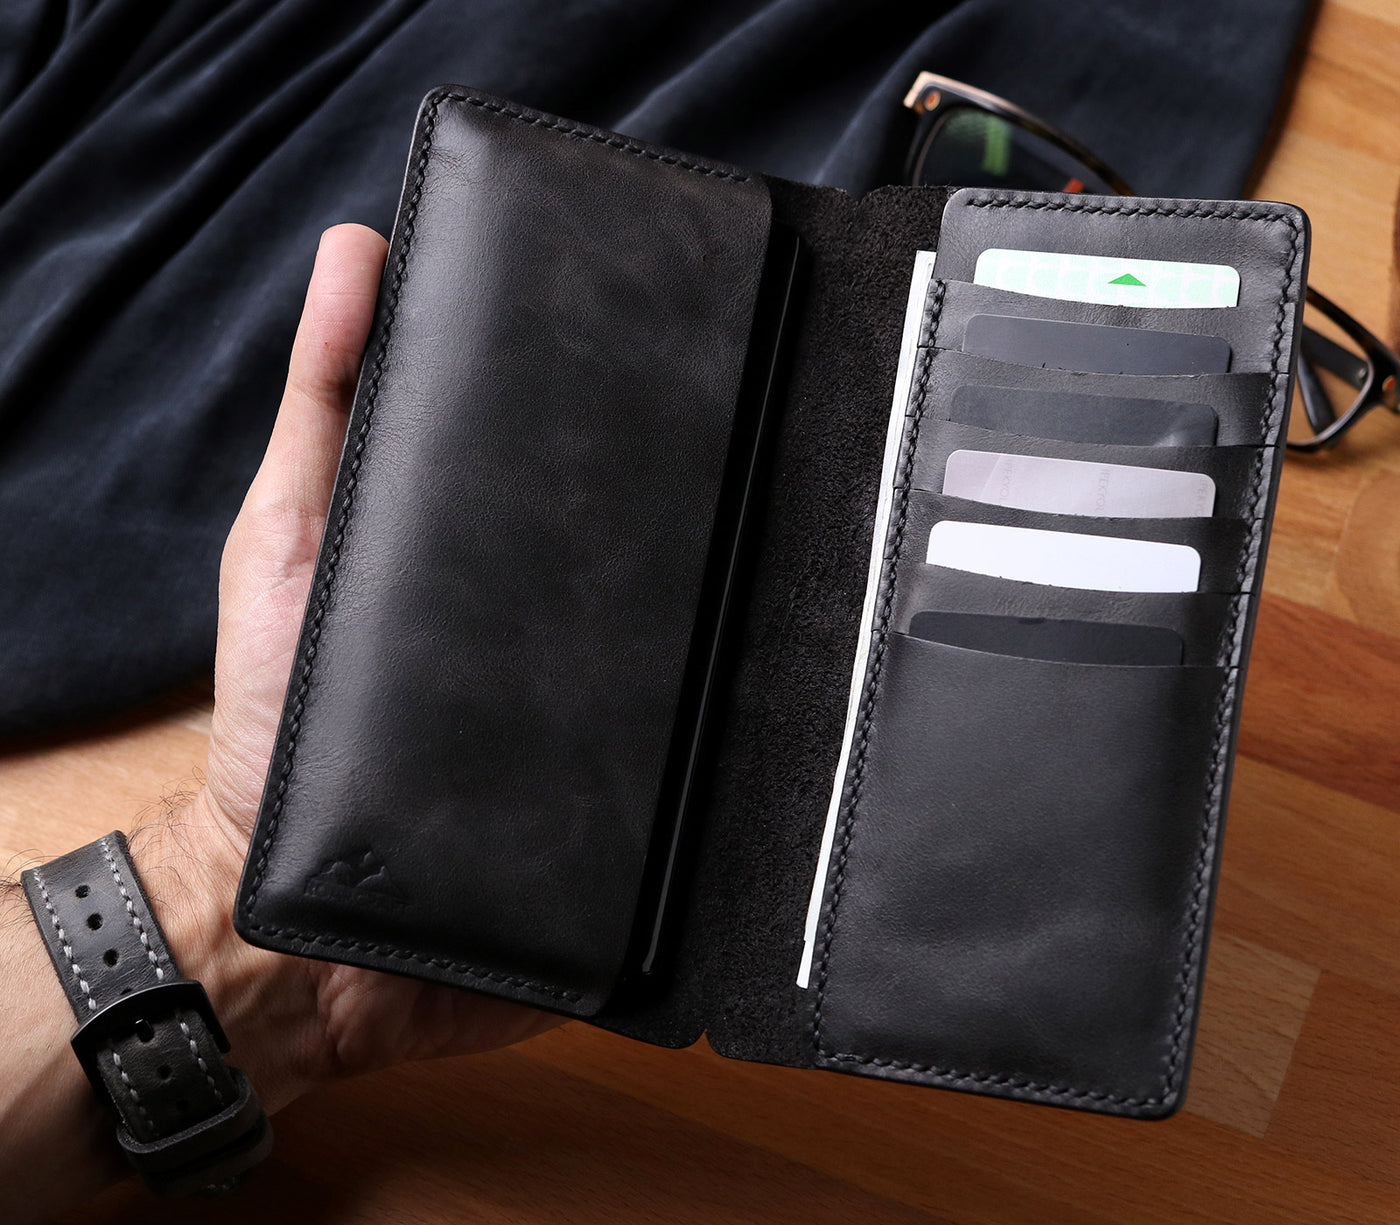 iPhone Leather Wallet Case - Tripolis